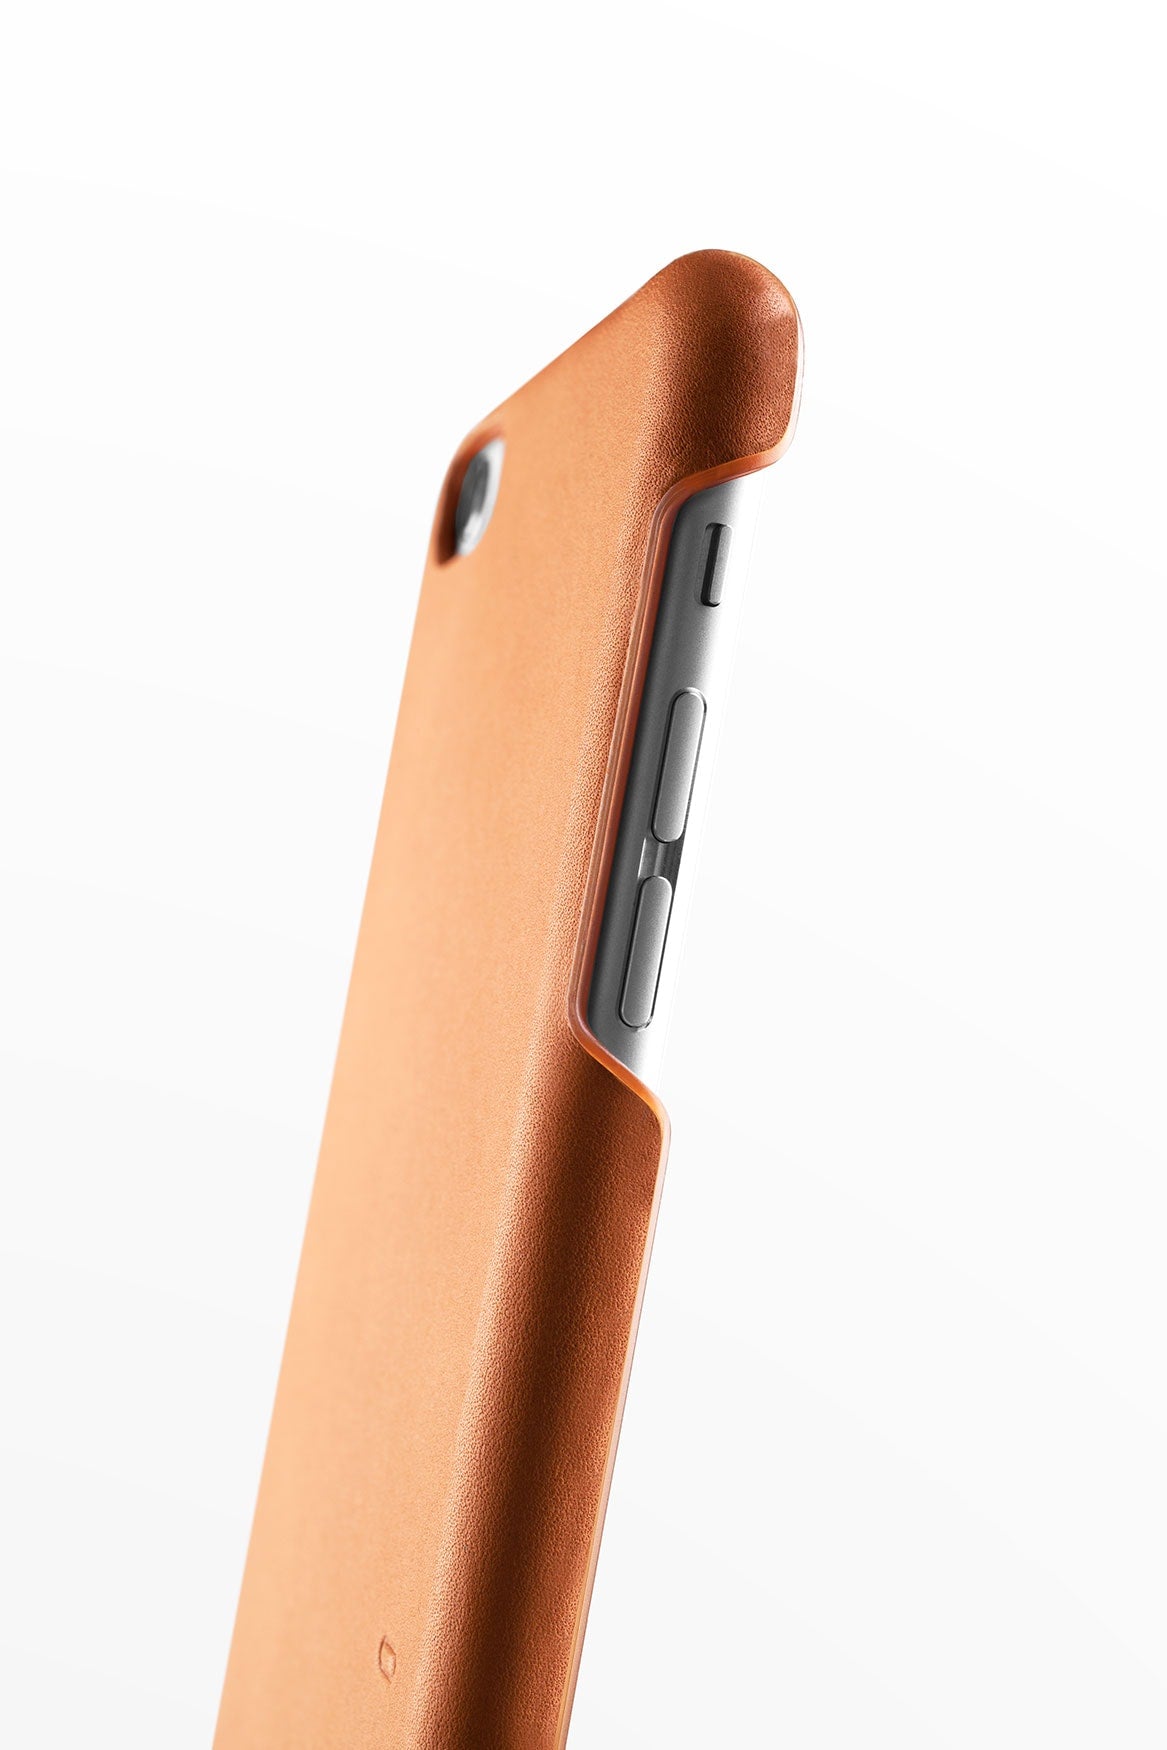 Leather Case for iPhone 6s Plus Tan 006